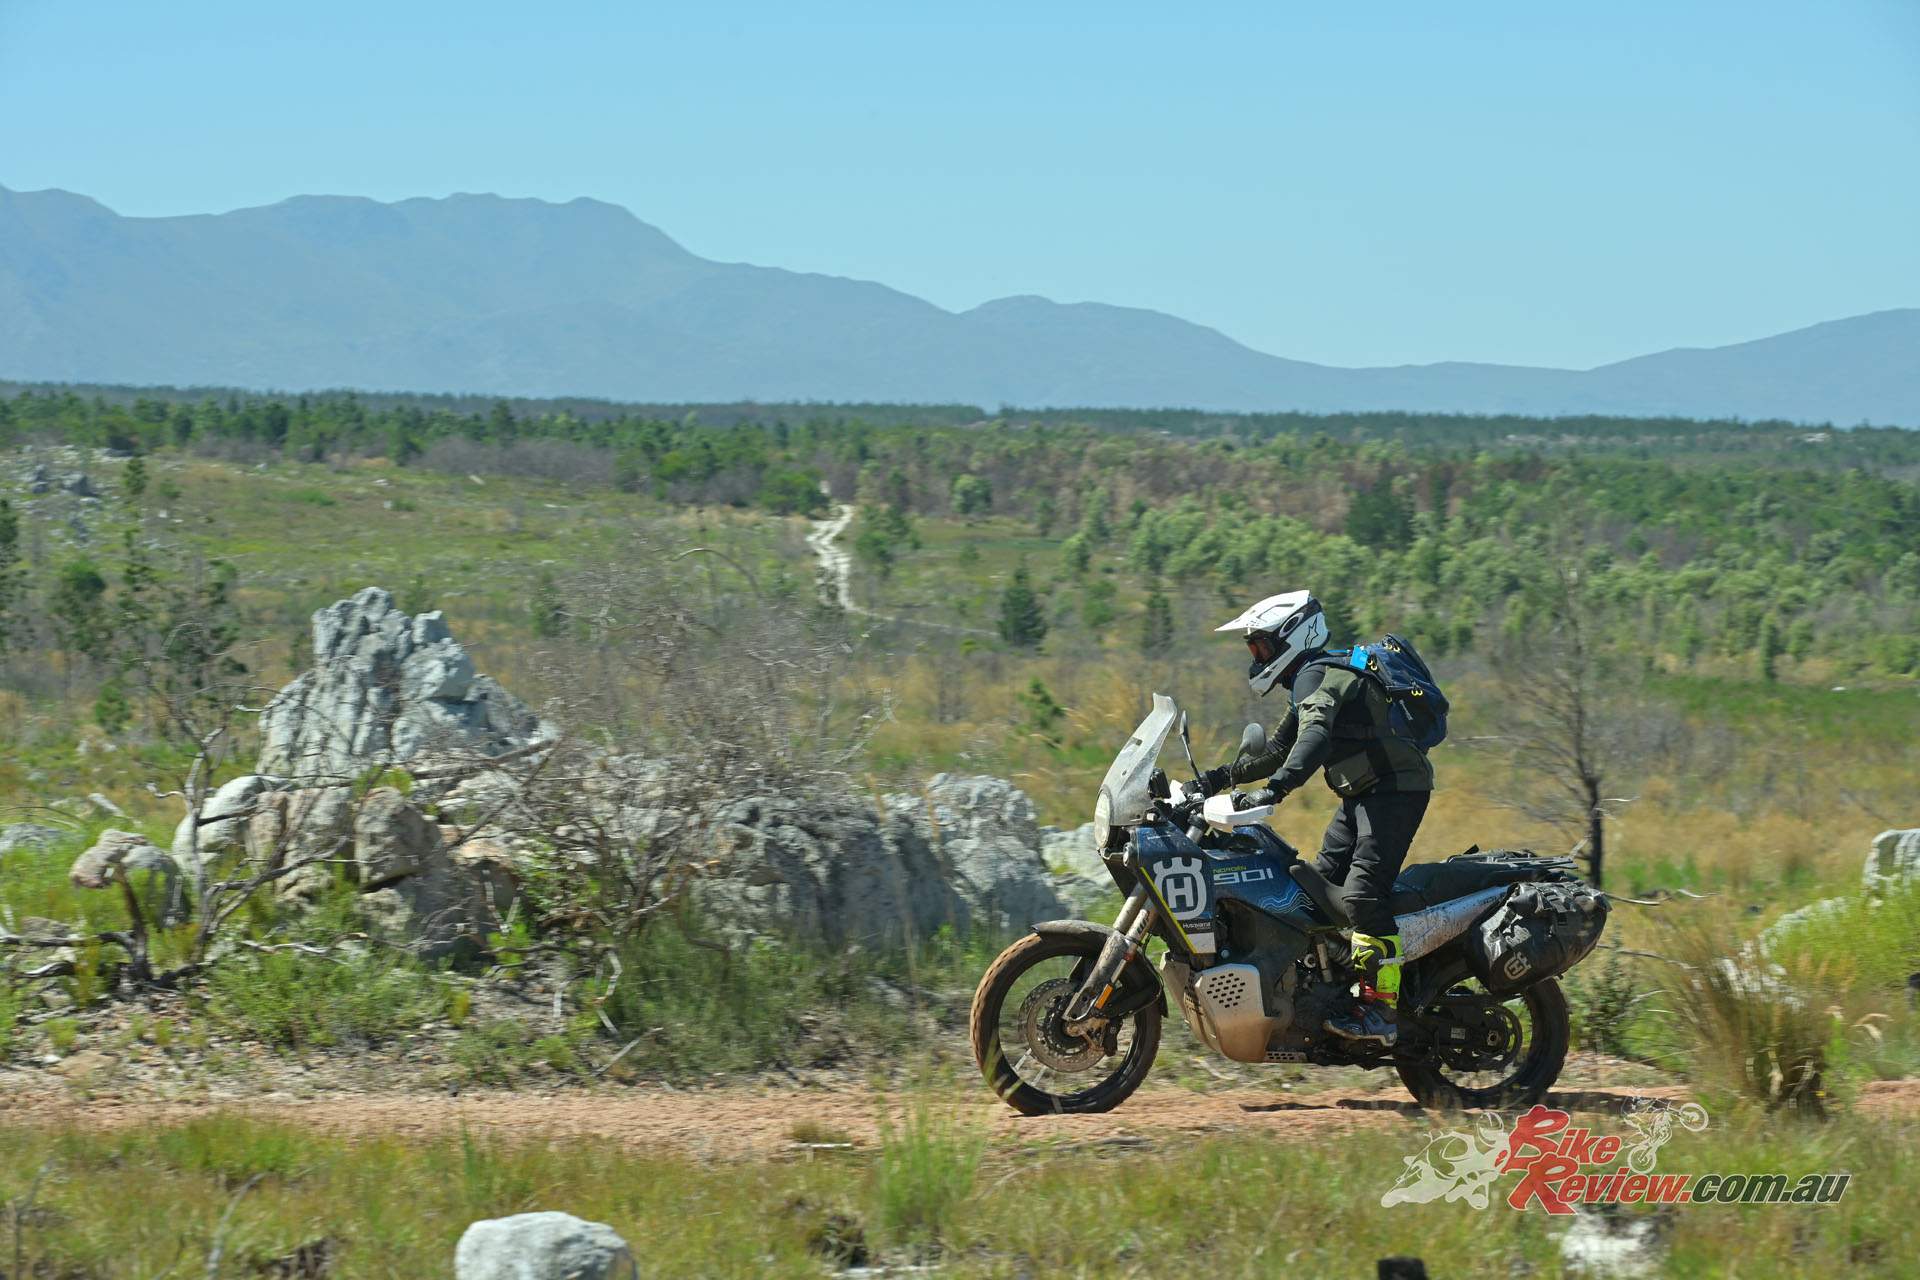 South Africa has some seriously harsh riding conditions, a perfect test for the beefed up Norden 901 Expedition...